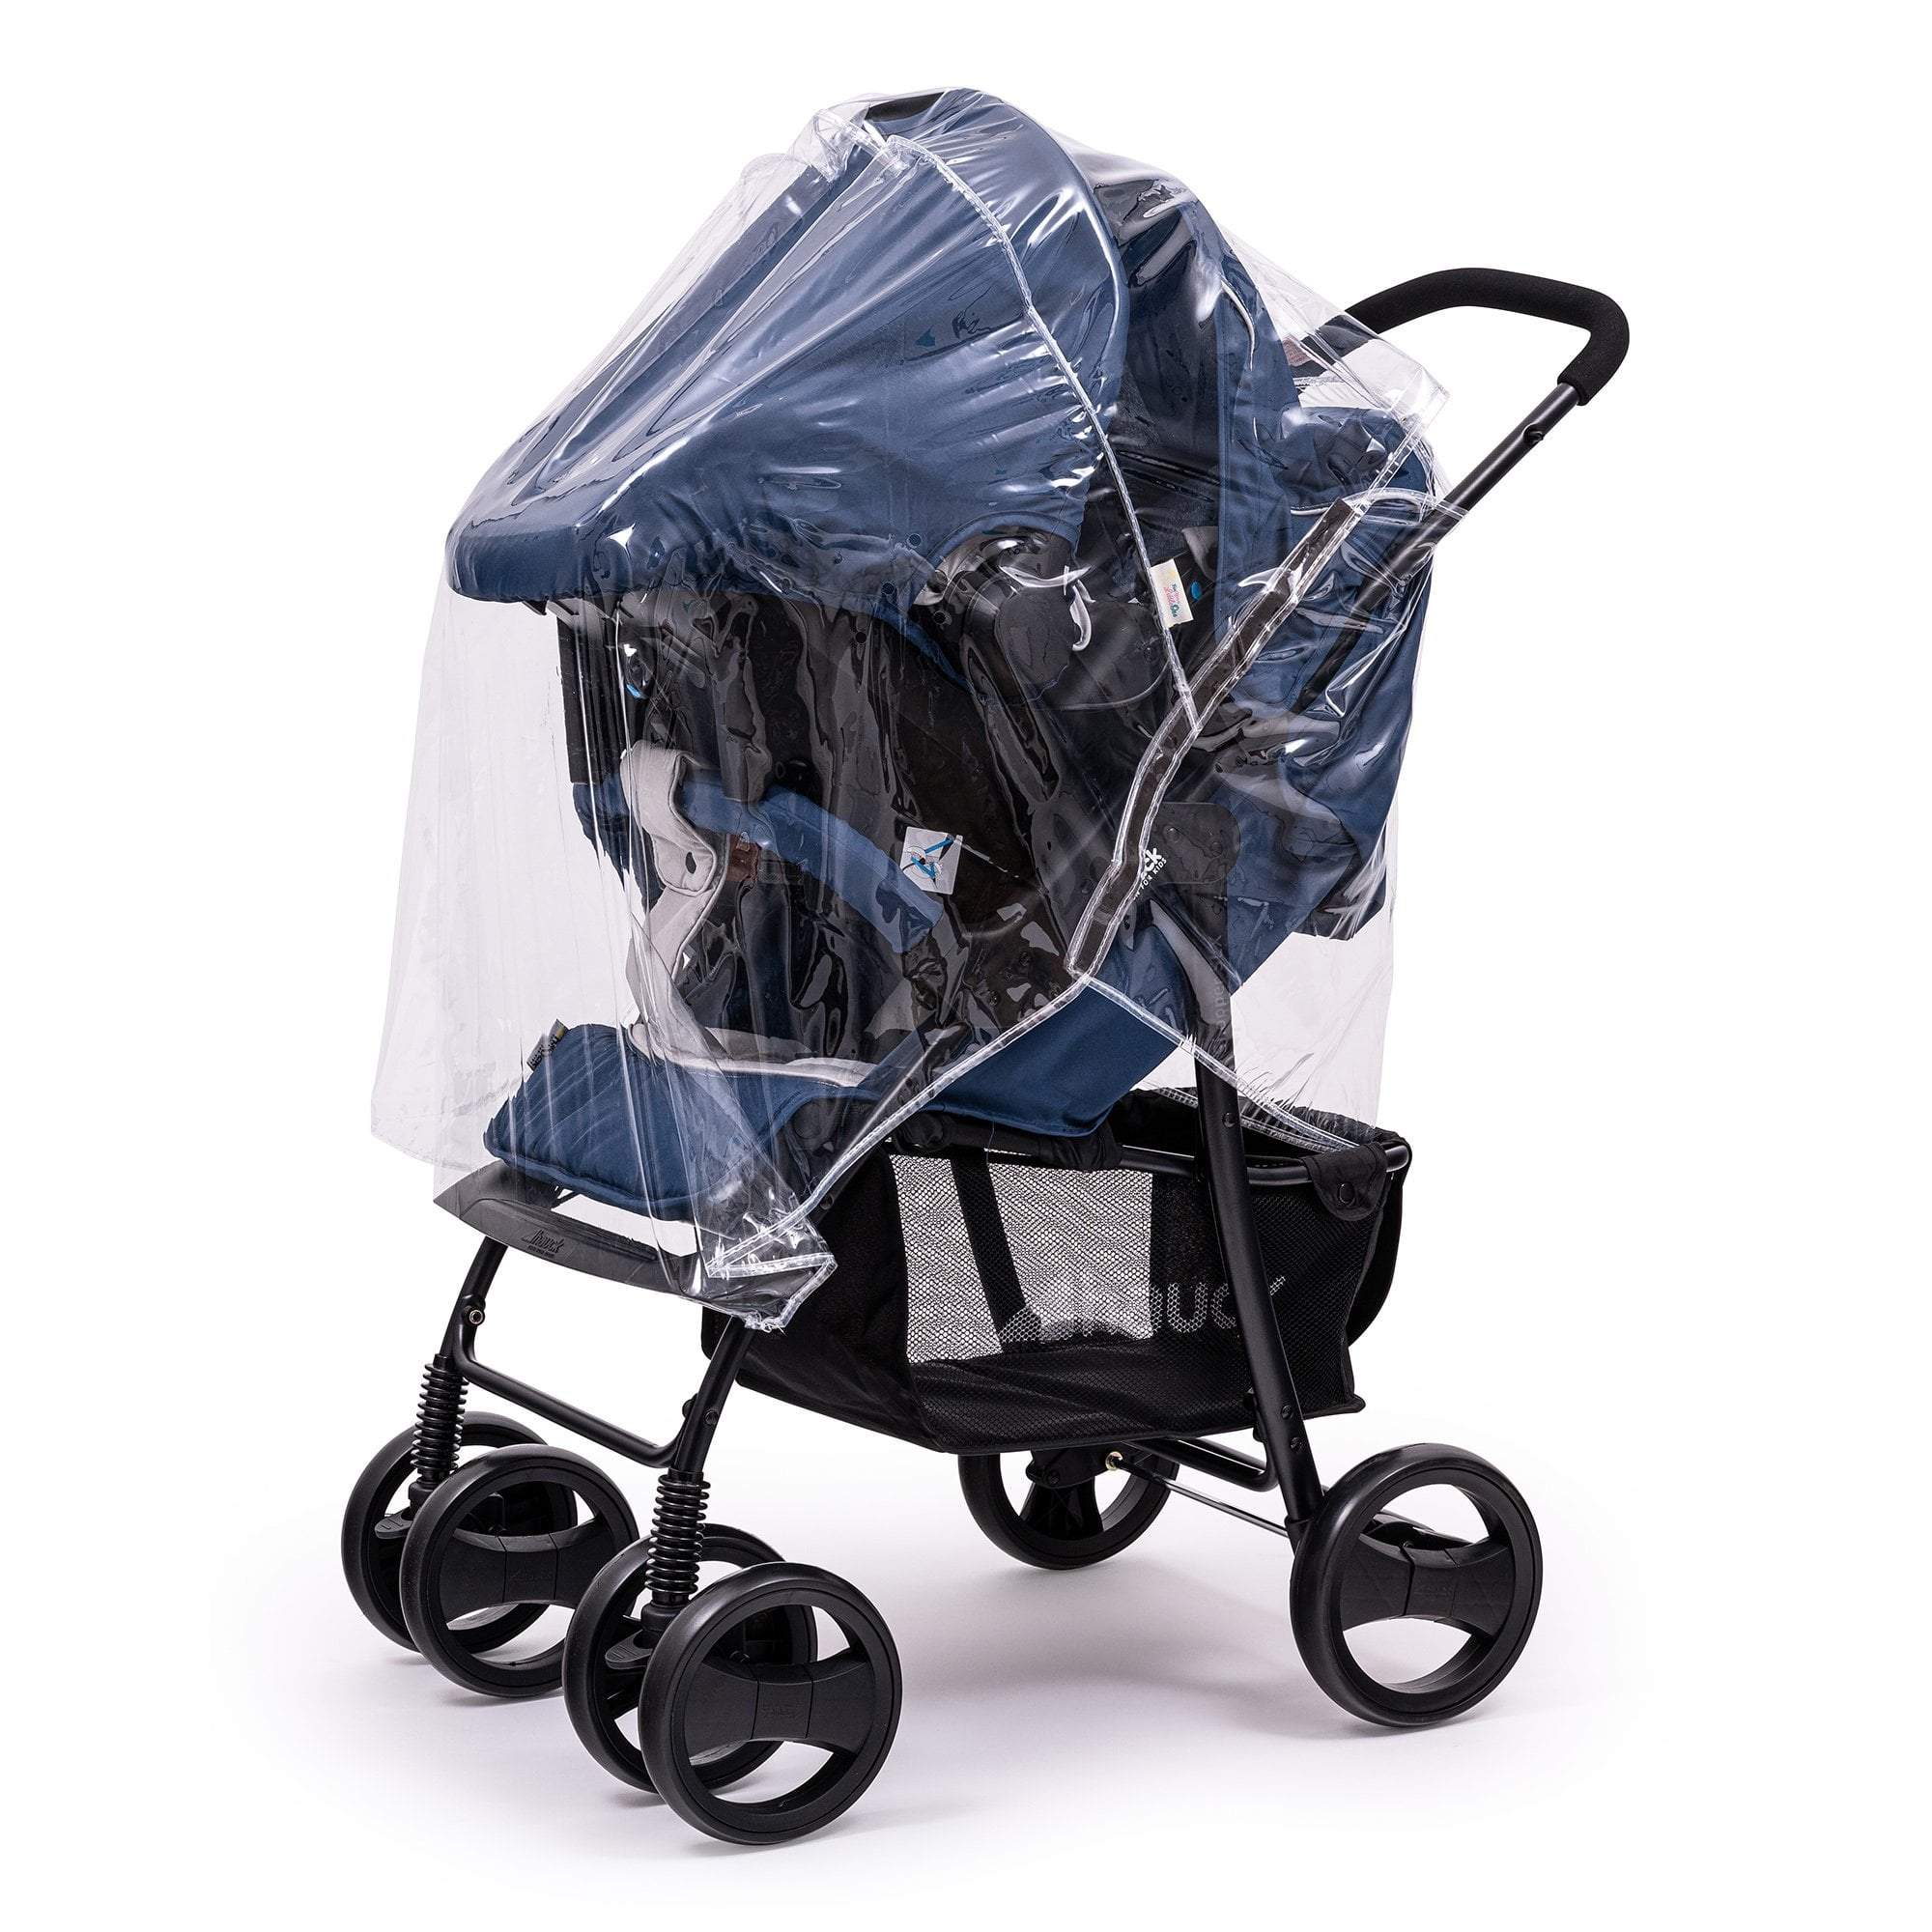 Travel System Raincover Compatible with Out 'n' About - Fits All Models - For Your Little One